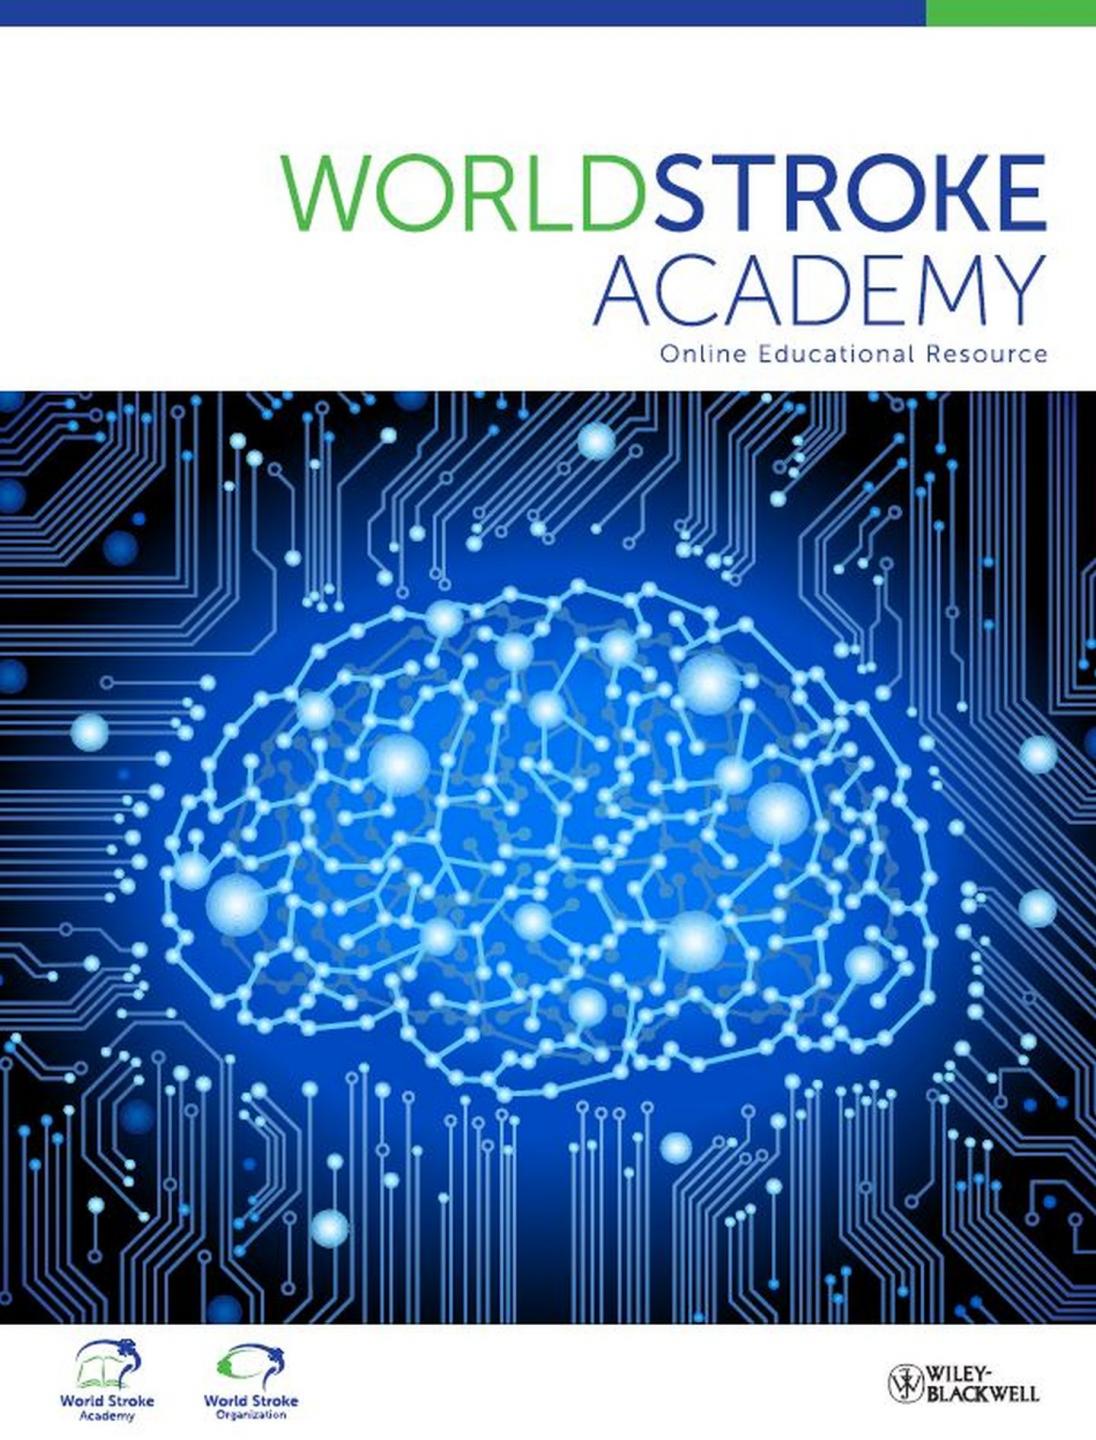 Introduction to the World Stroke Academy